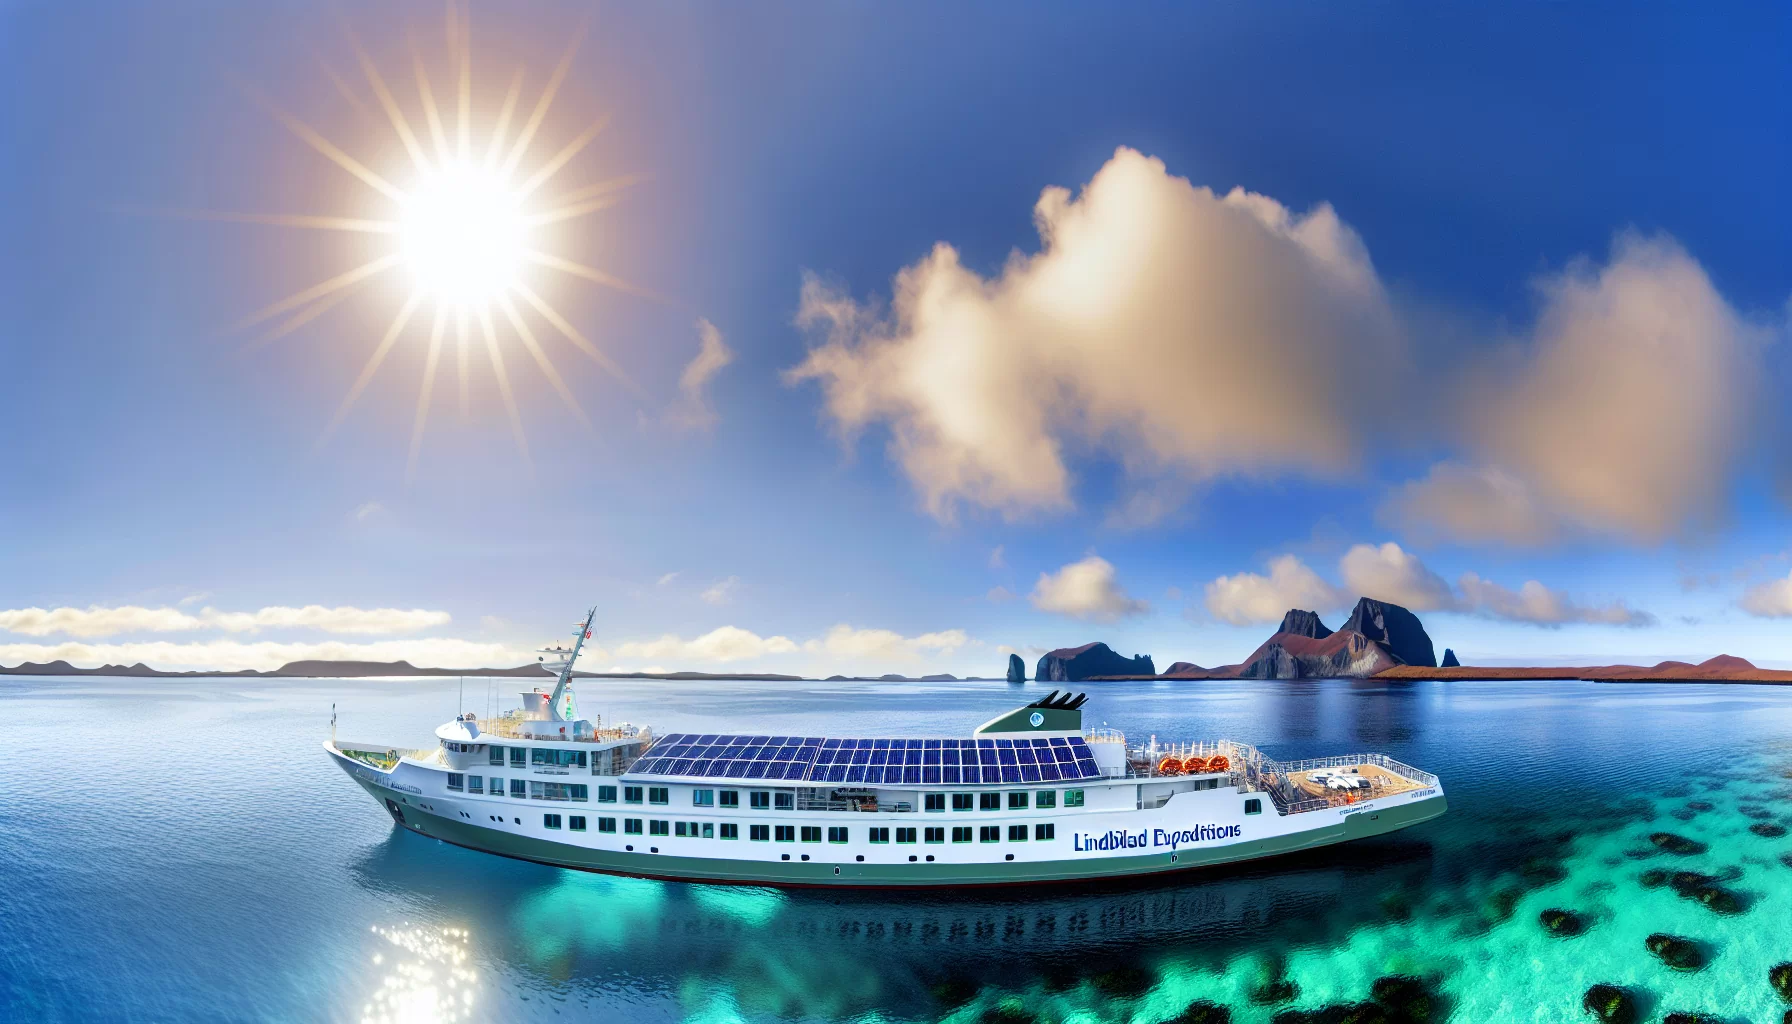 Lindblad expeditions expands fleet, boosting sustainable tourism in the Galapagos